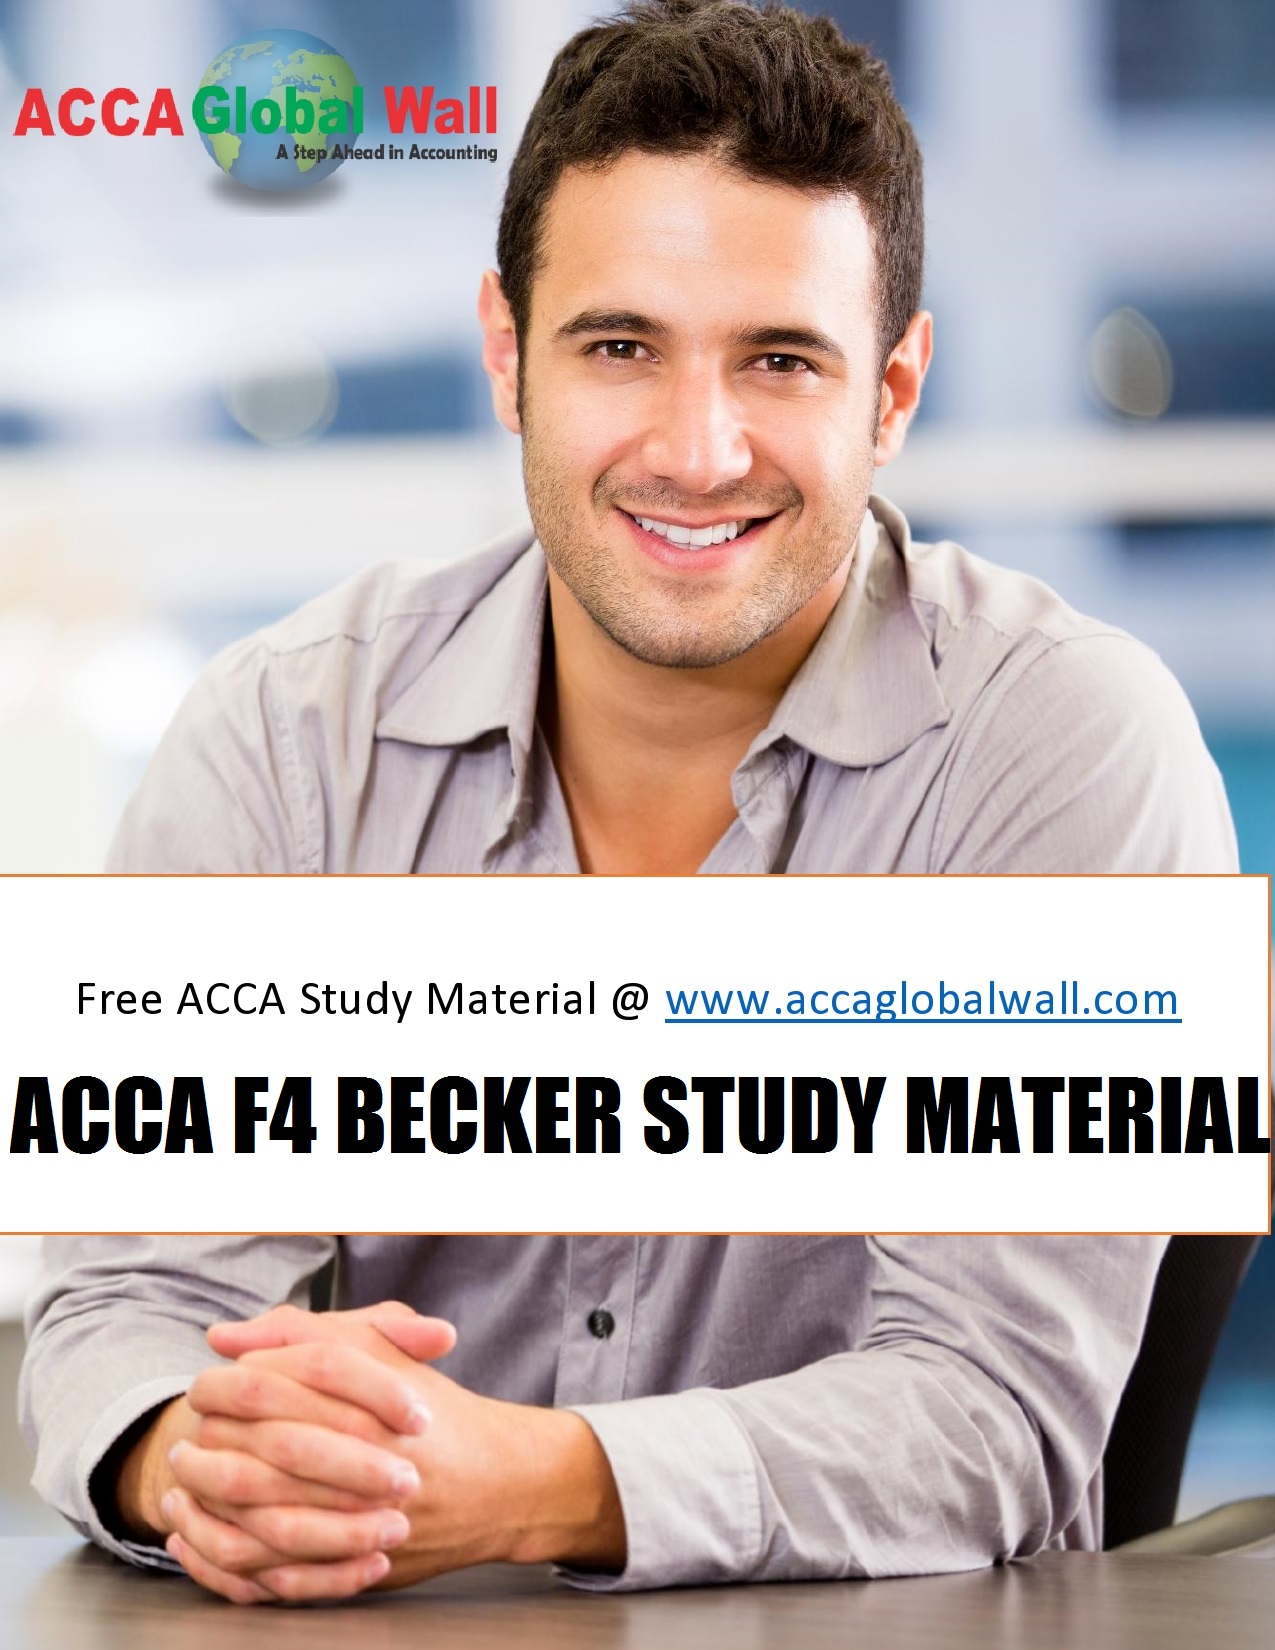 ACCA F4 BECKER STUDY MATERIAL ACCAGLOBALWALL.COM